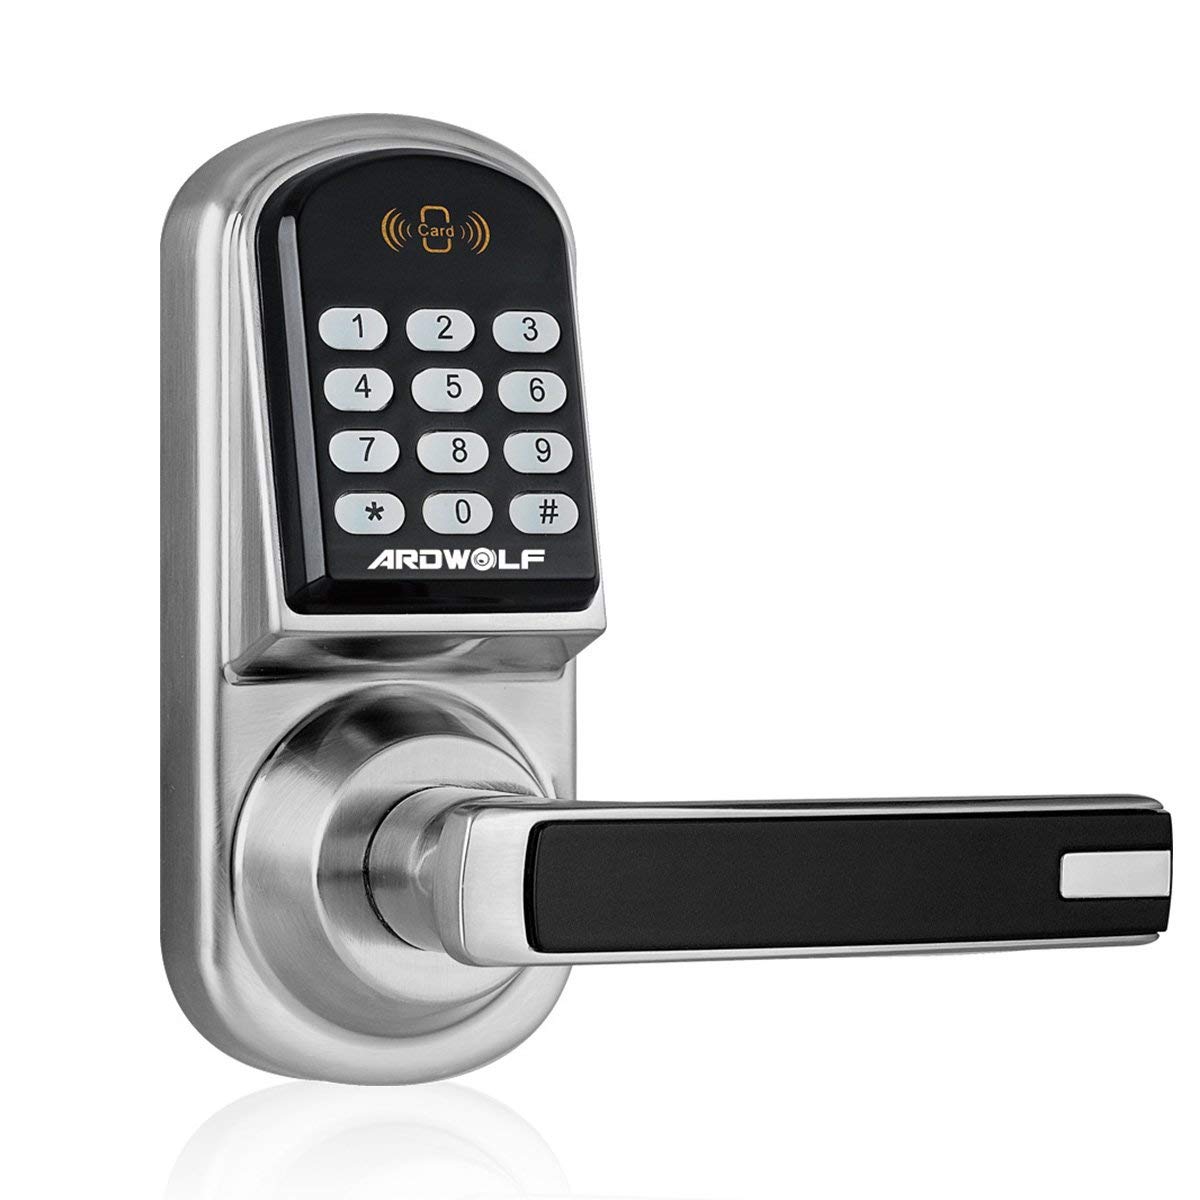 Ardwolf A30 Keyless Smart Door Lock Keypad, with Reversible Lever and Automatic Locking